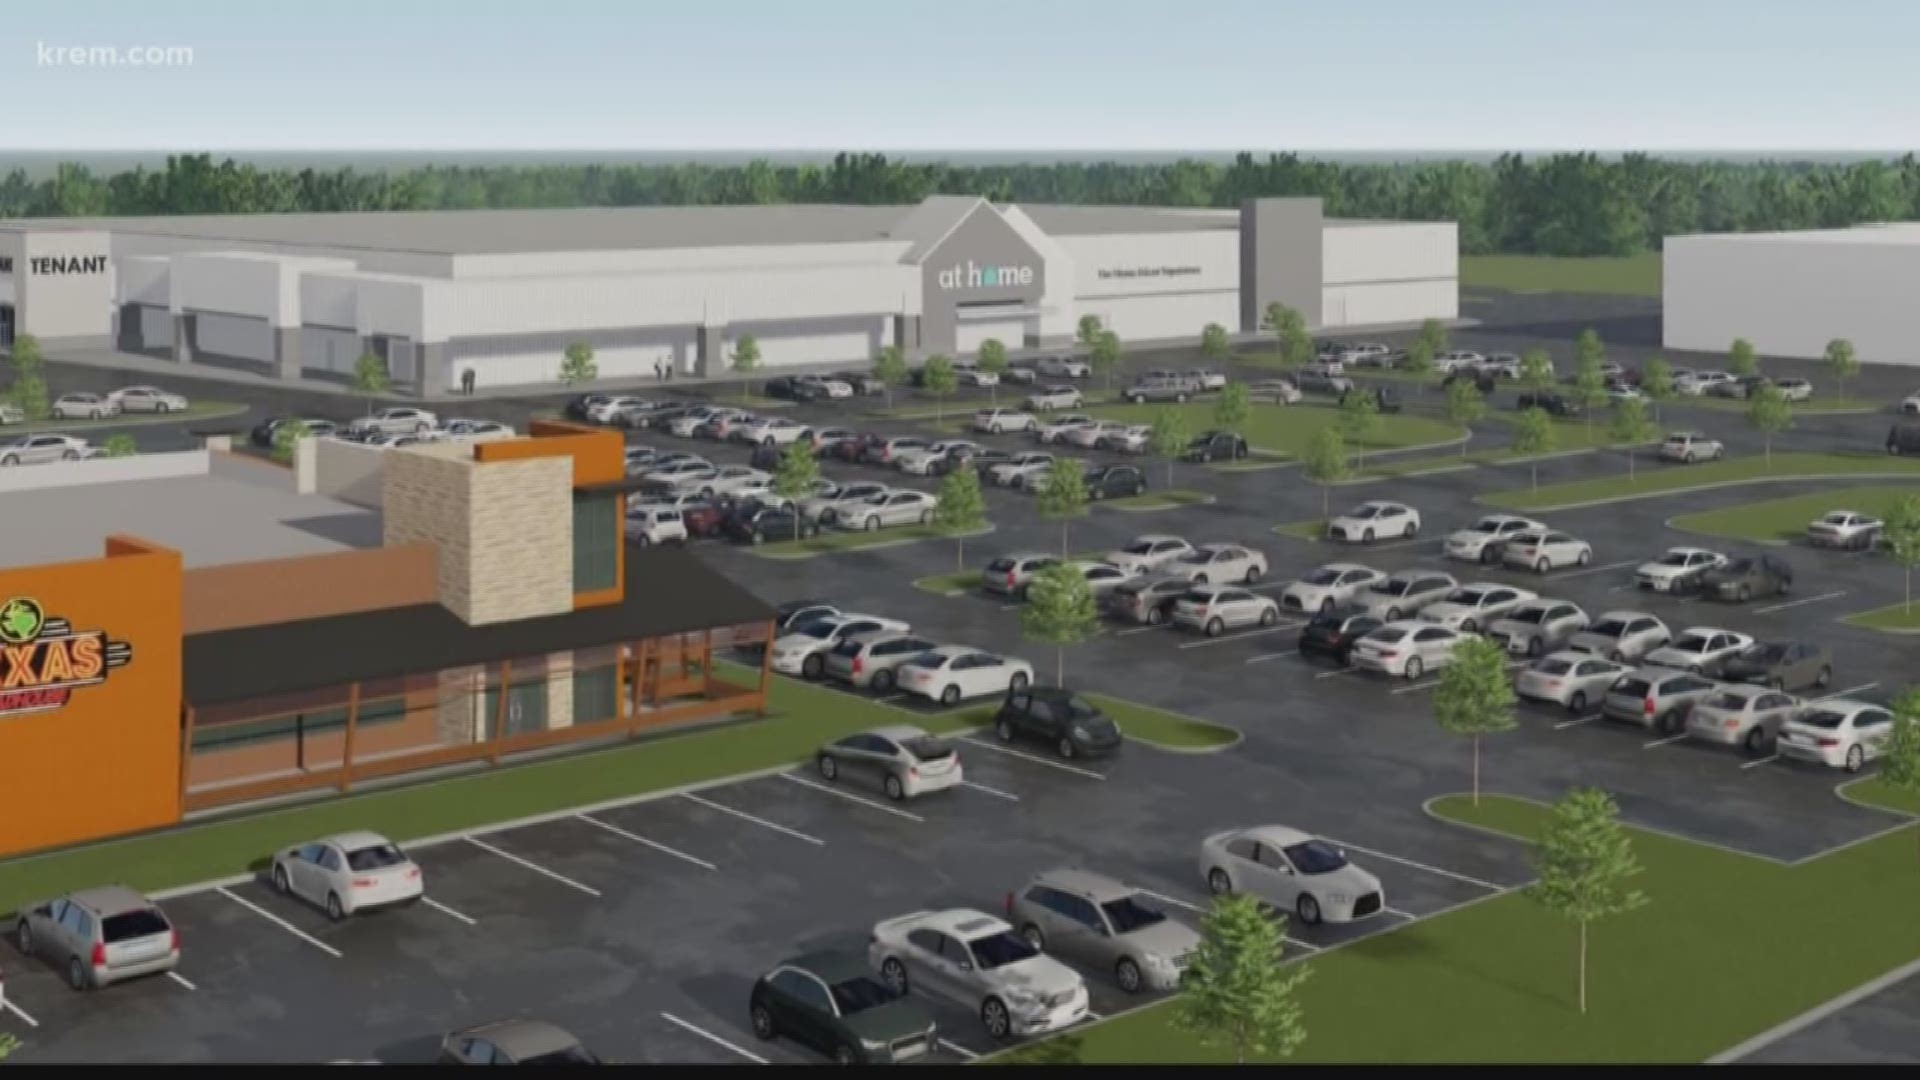 Texas Roadhouse and At Home furniture are the first two confirmed businesses that will make up part of the Northside Marketplace at the former N. Division Costco.